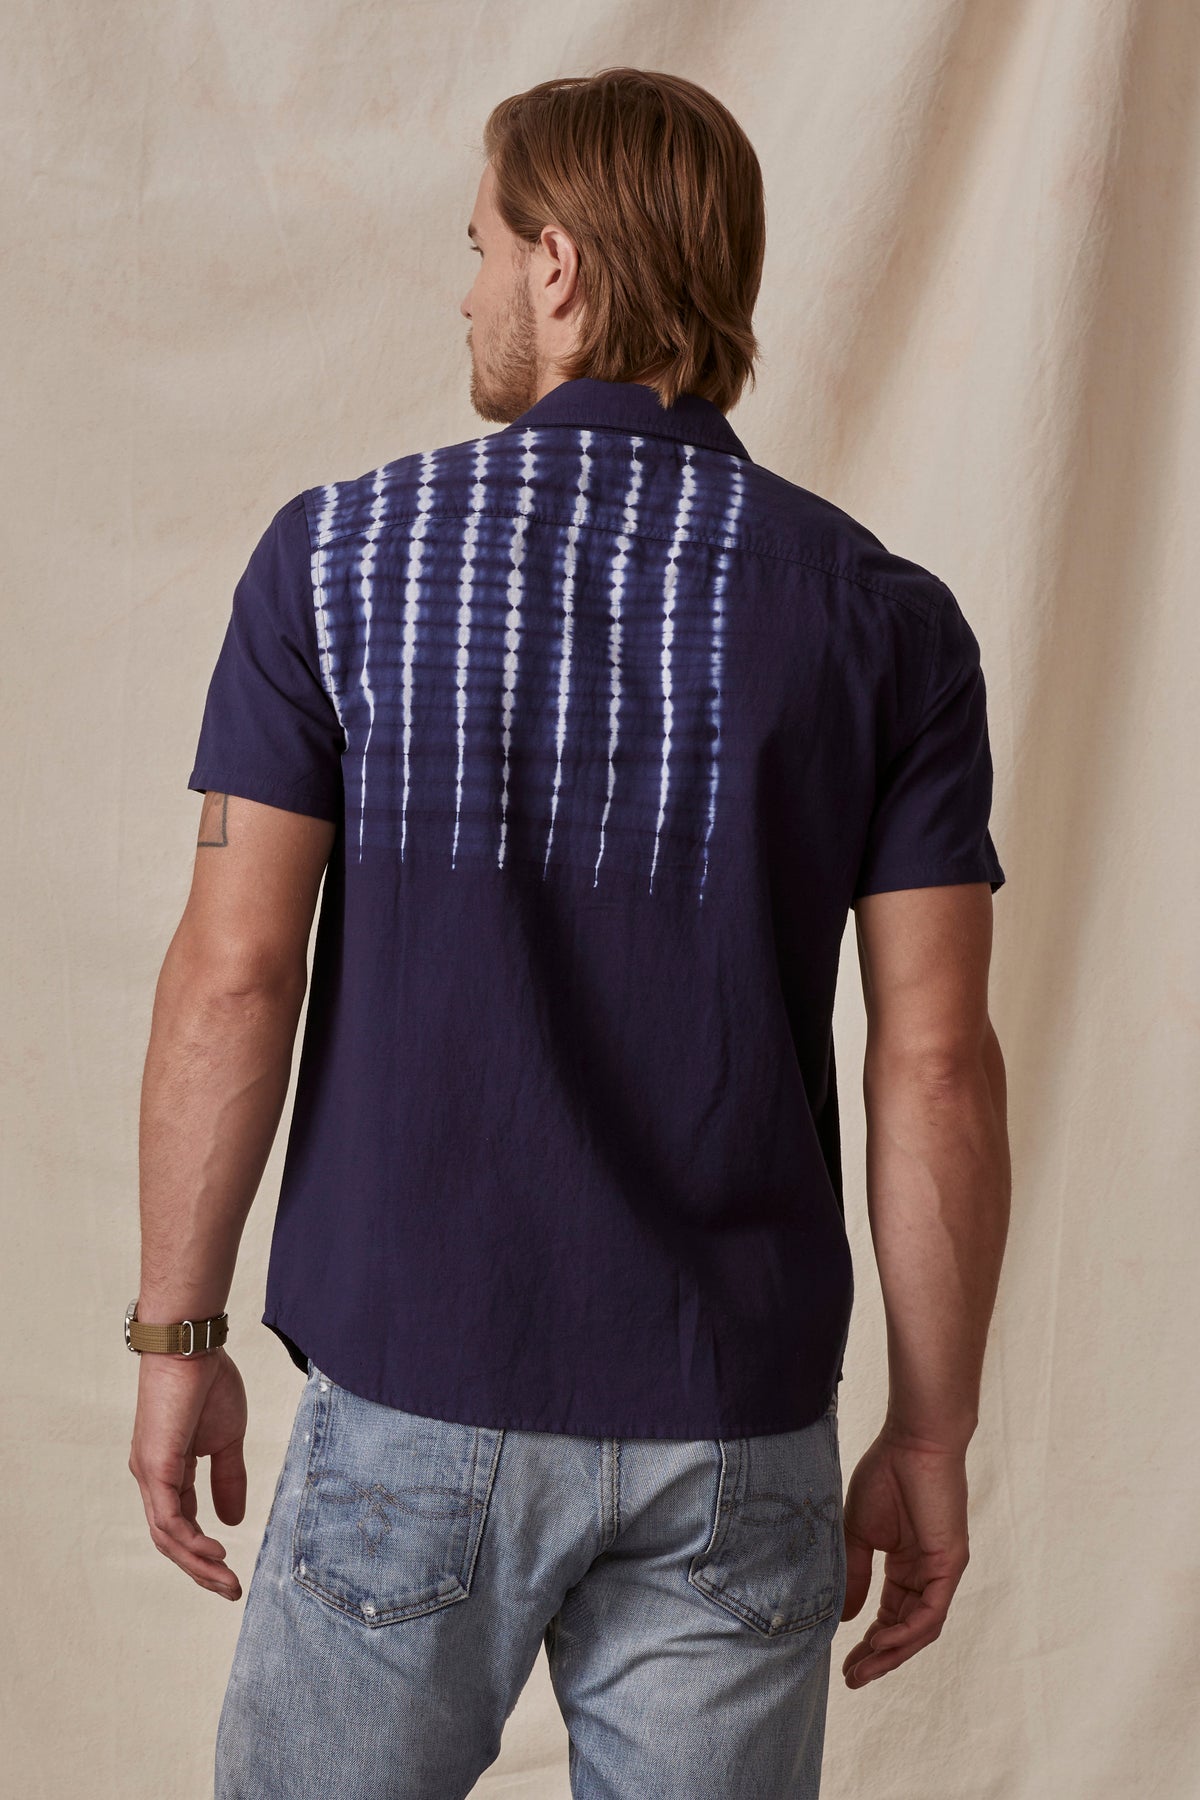 A man with long blonde hair stands with his back facing the camera, wearing a dark purple RAFAEL BUTTON-UP SHIRT by Velvet by Graham & Spencer with a white tie-dye design on the back and light blue jeans.-36753533829313